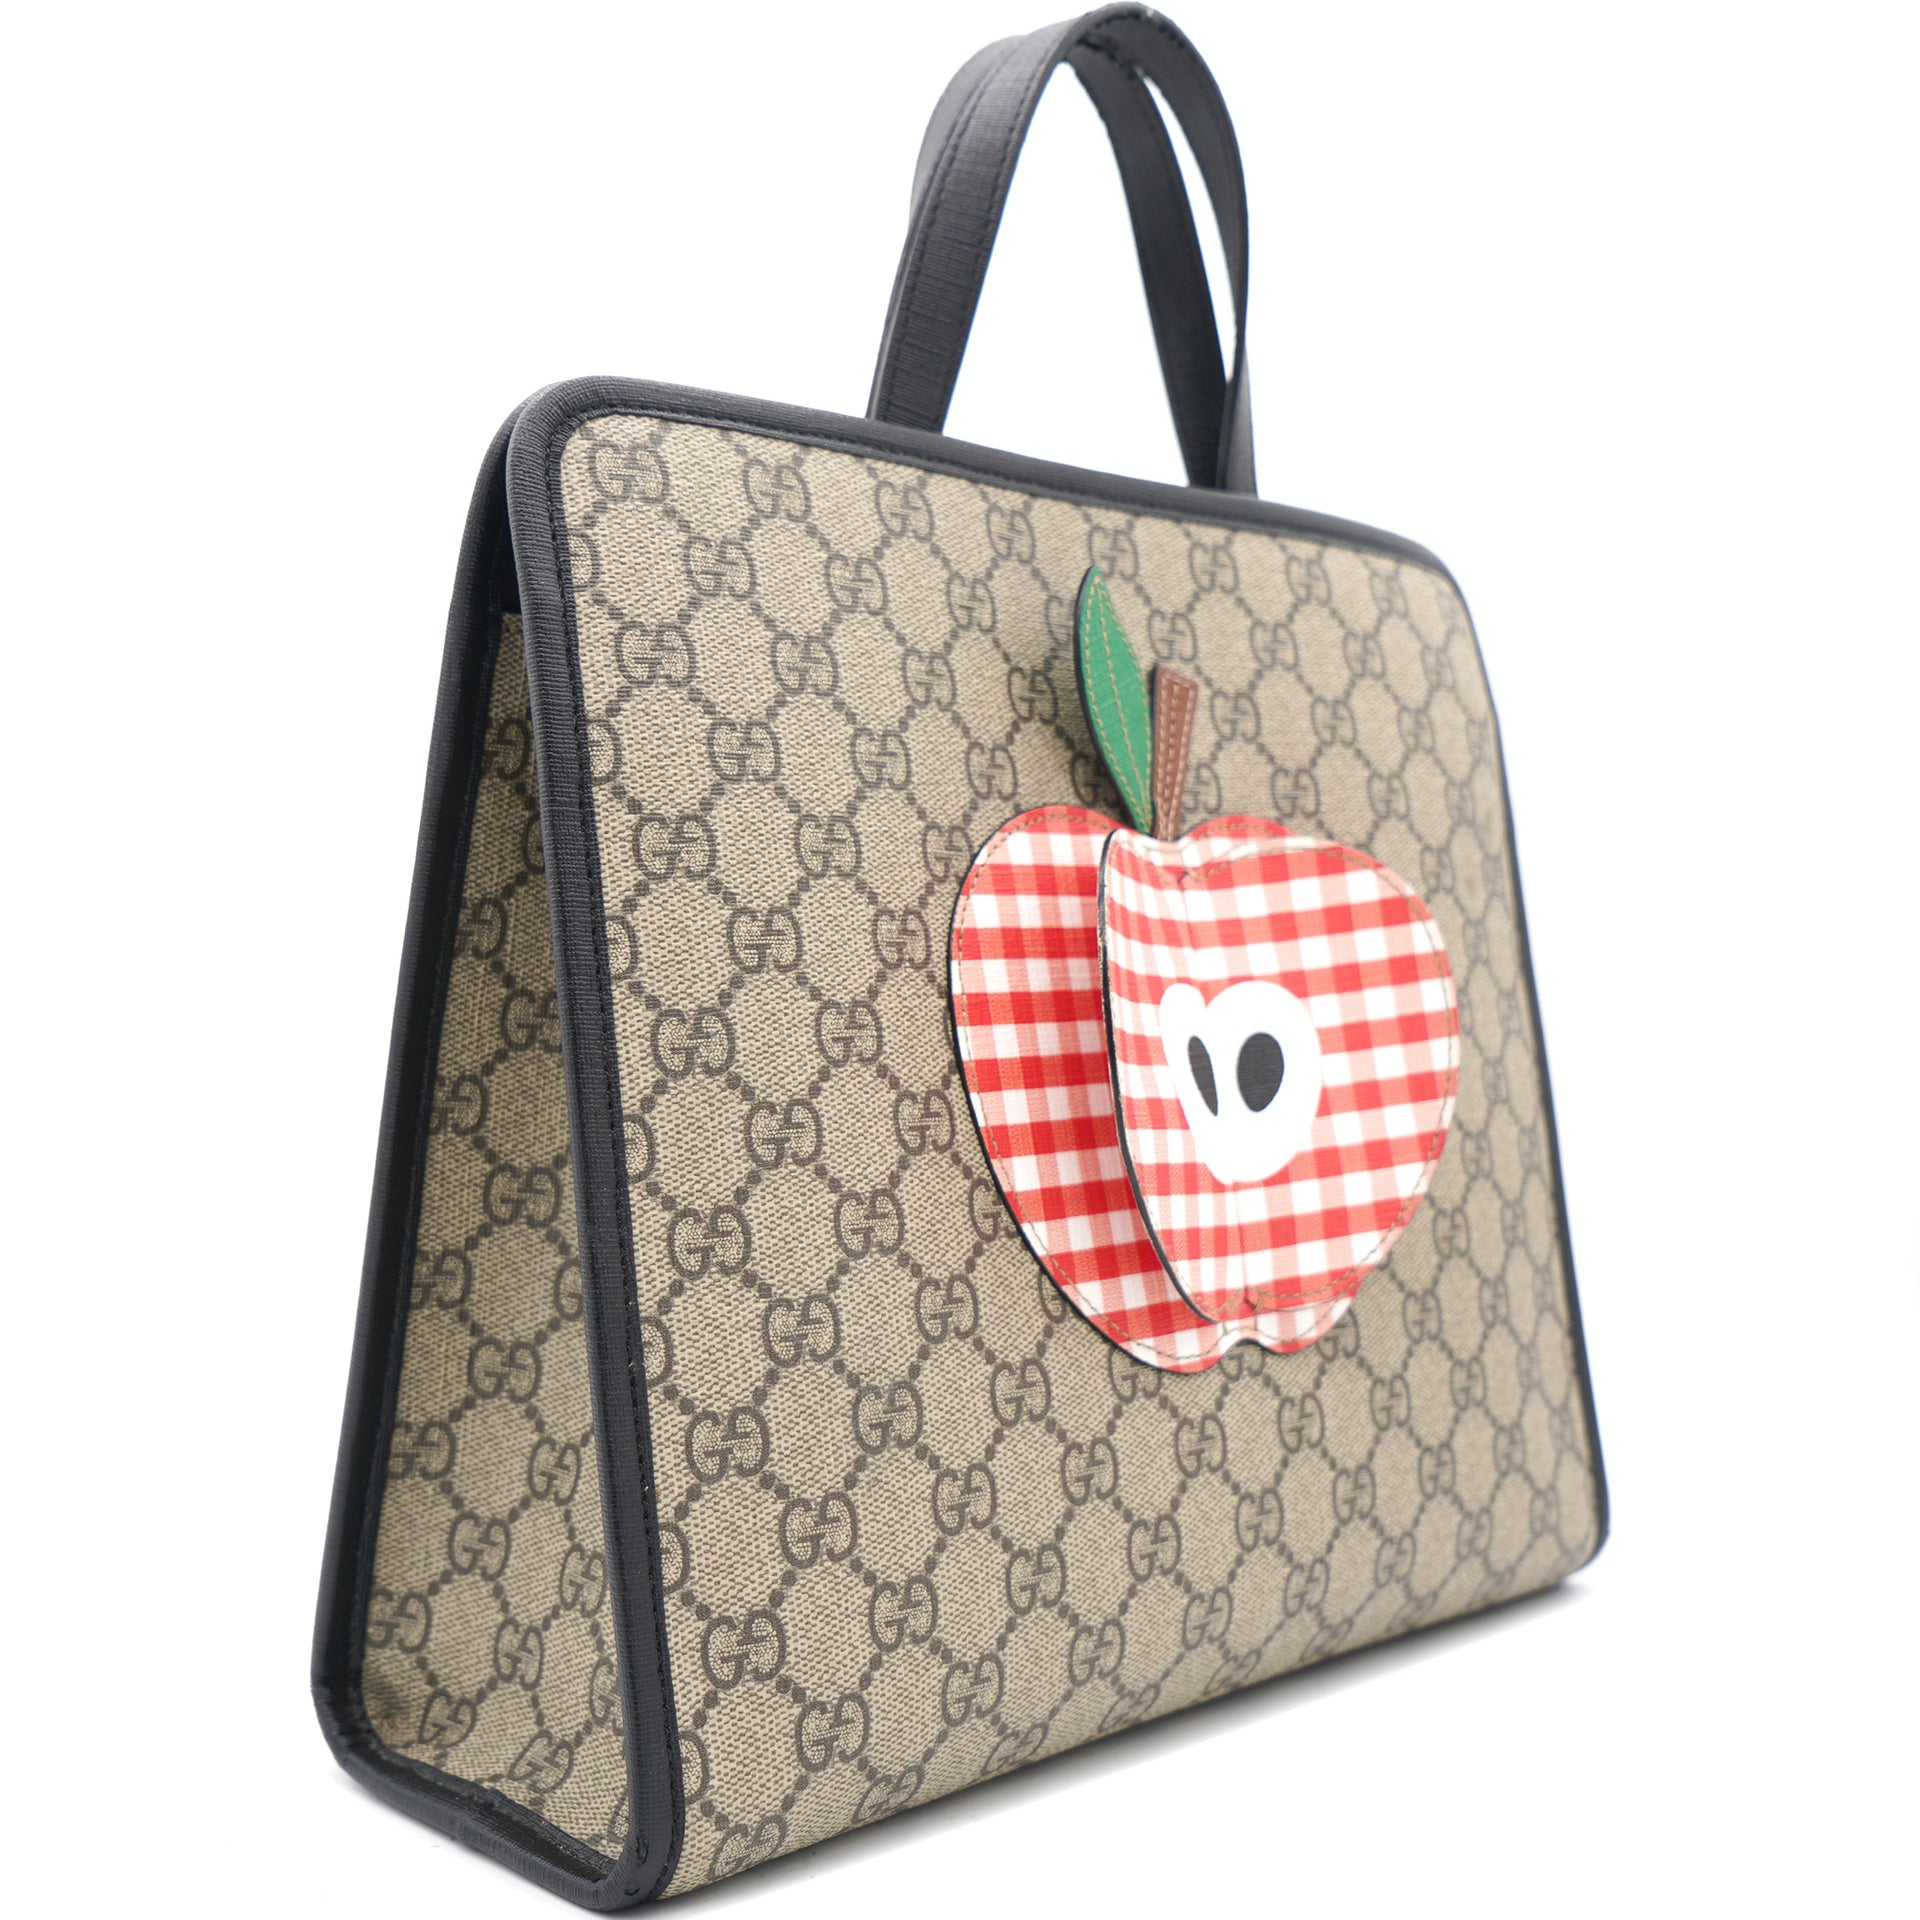 Children's tote bag with apple